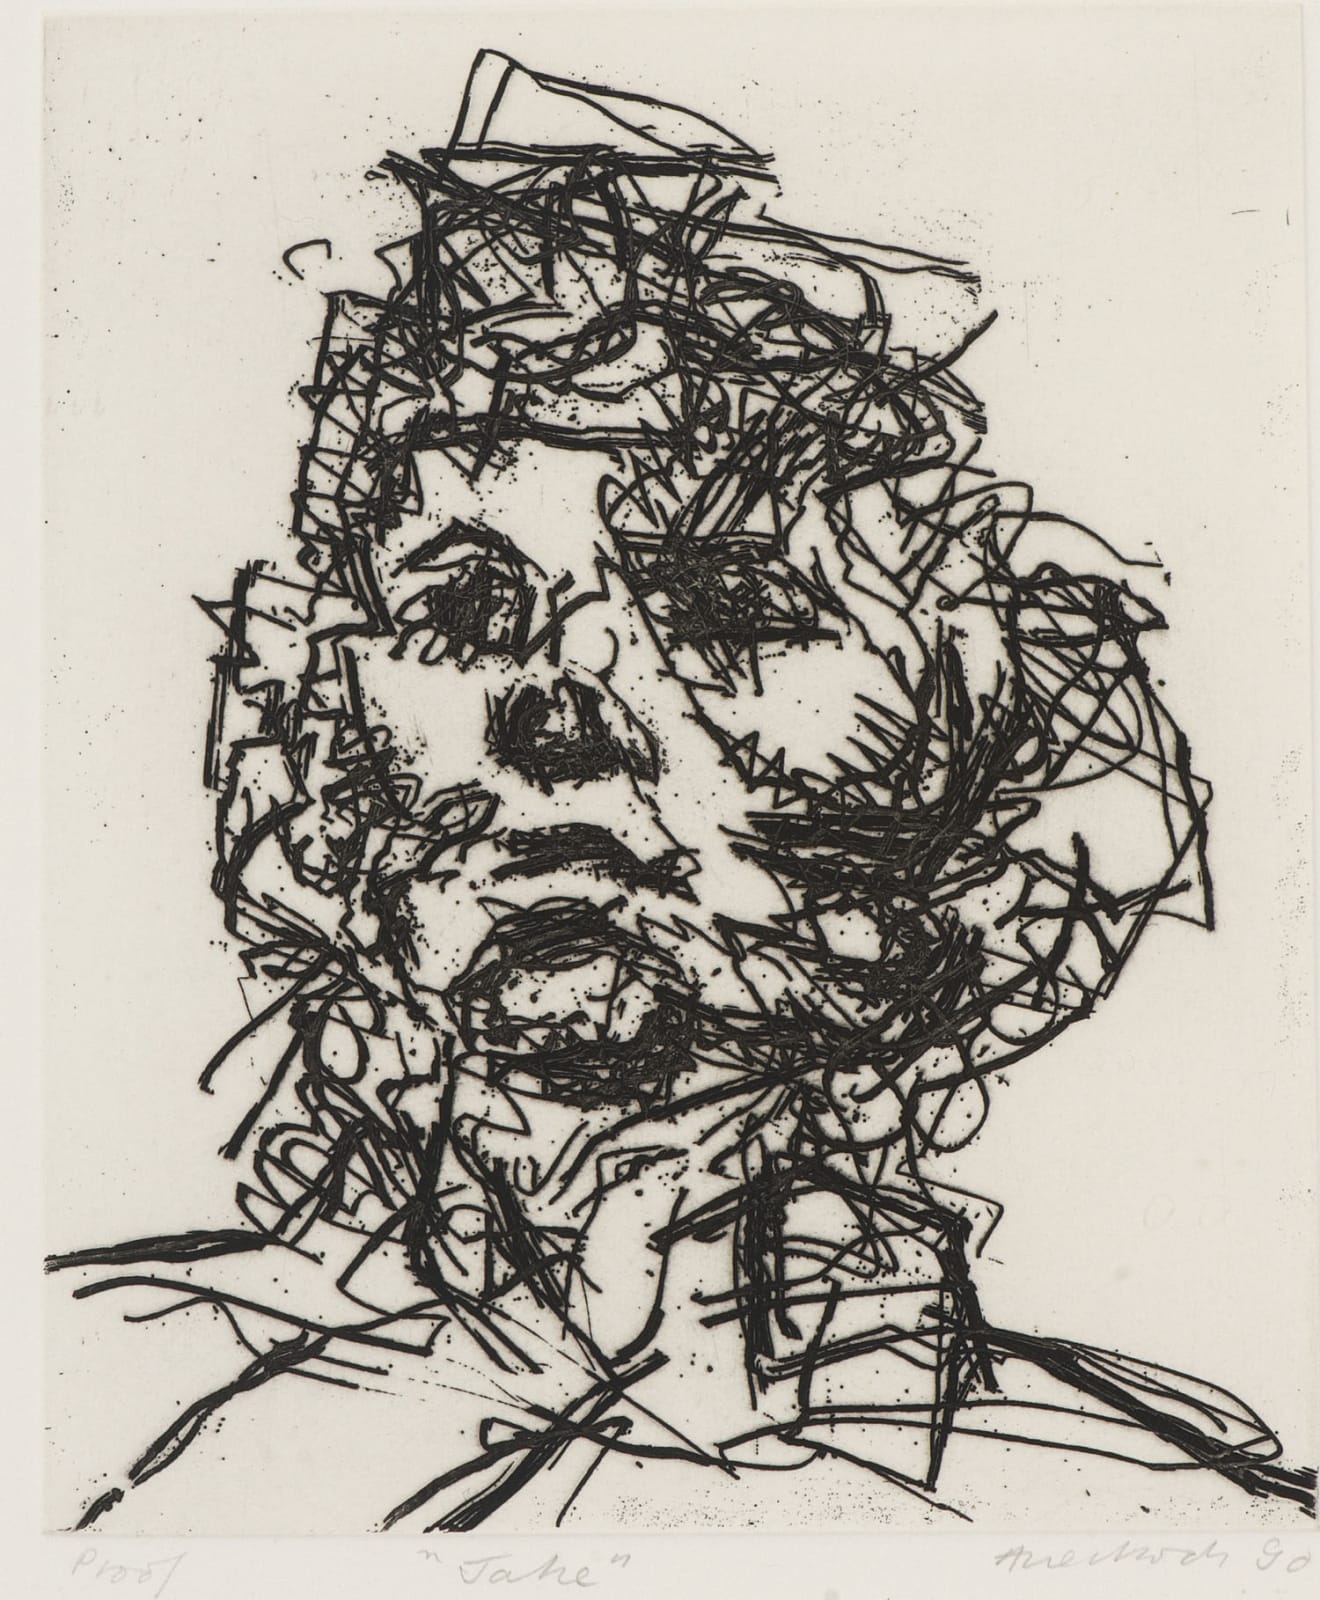 Frank Auerbach (1931-) Jake, Series: Part of Seven Portraits 1990 Etching, printed on Somerset white paper, artist's proof outside the published edition of 50 20 x 16.5 cm Ben Uri Collection © Frank Auerbach, courtesy Marlborough Fine Art To see and discover more about this artist click here